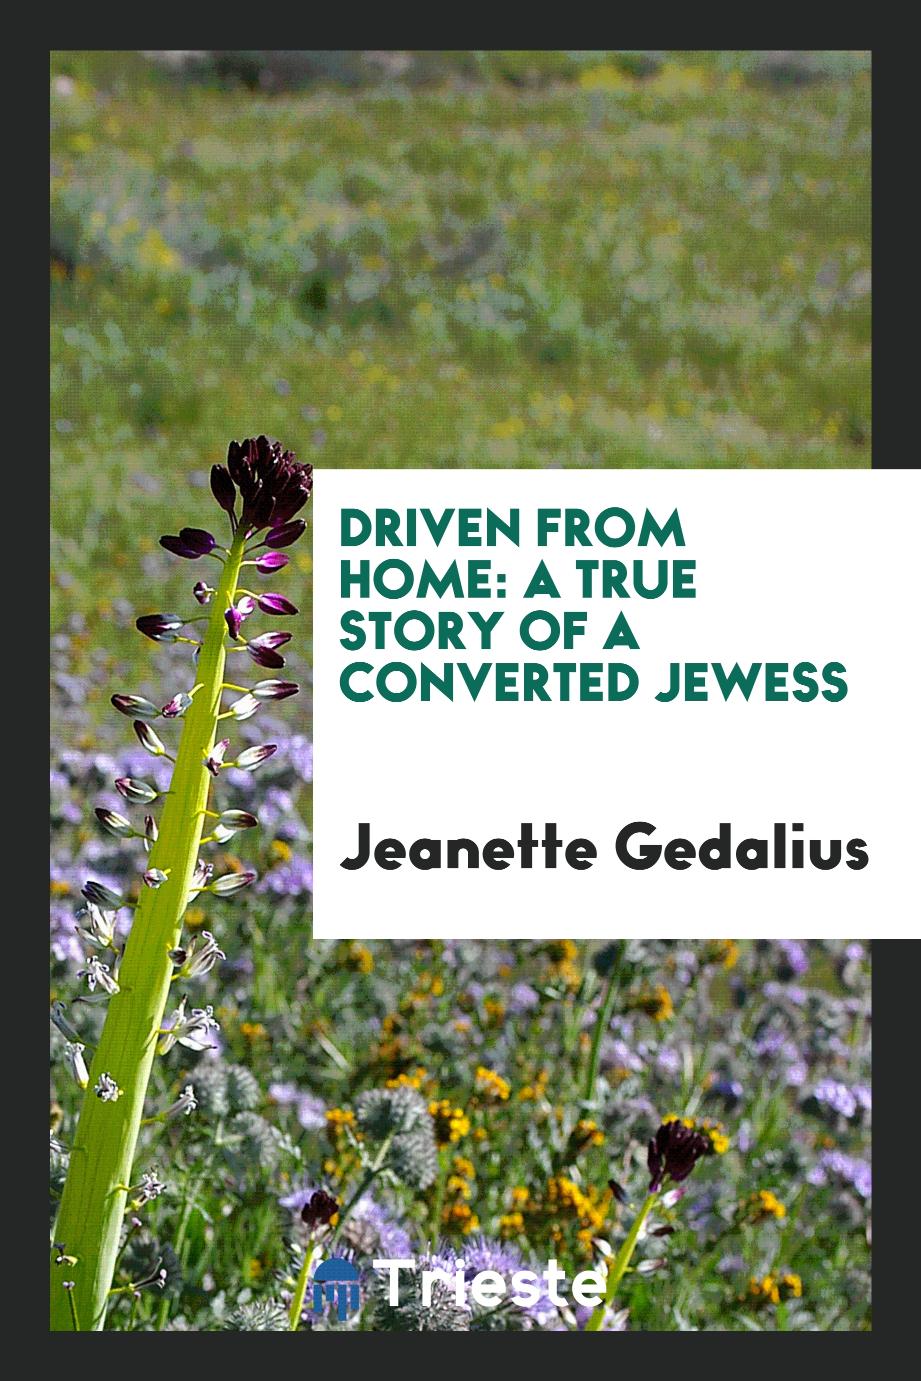 Driven from Home: A True Story of a Converted Jewess